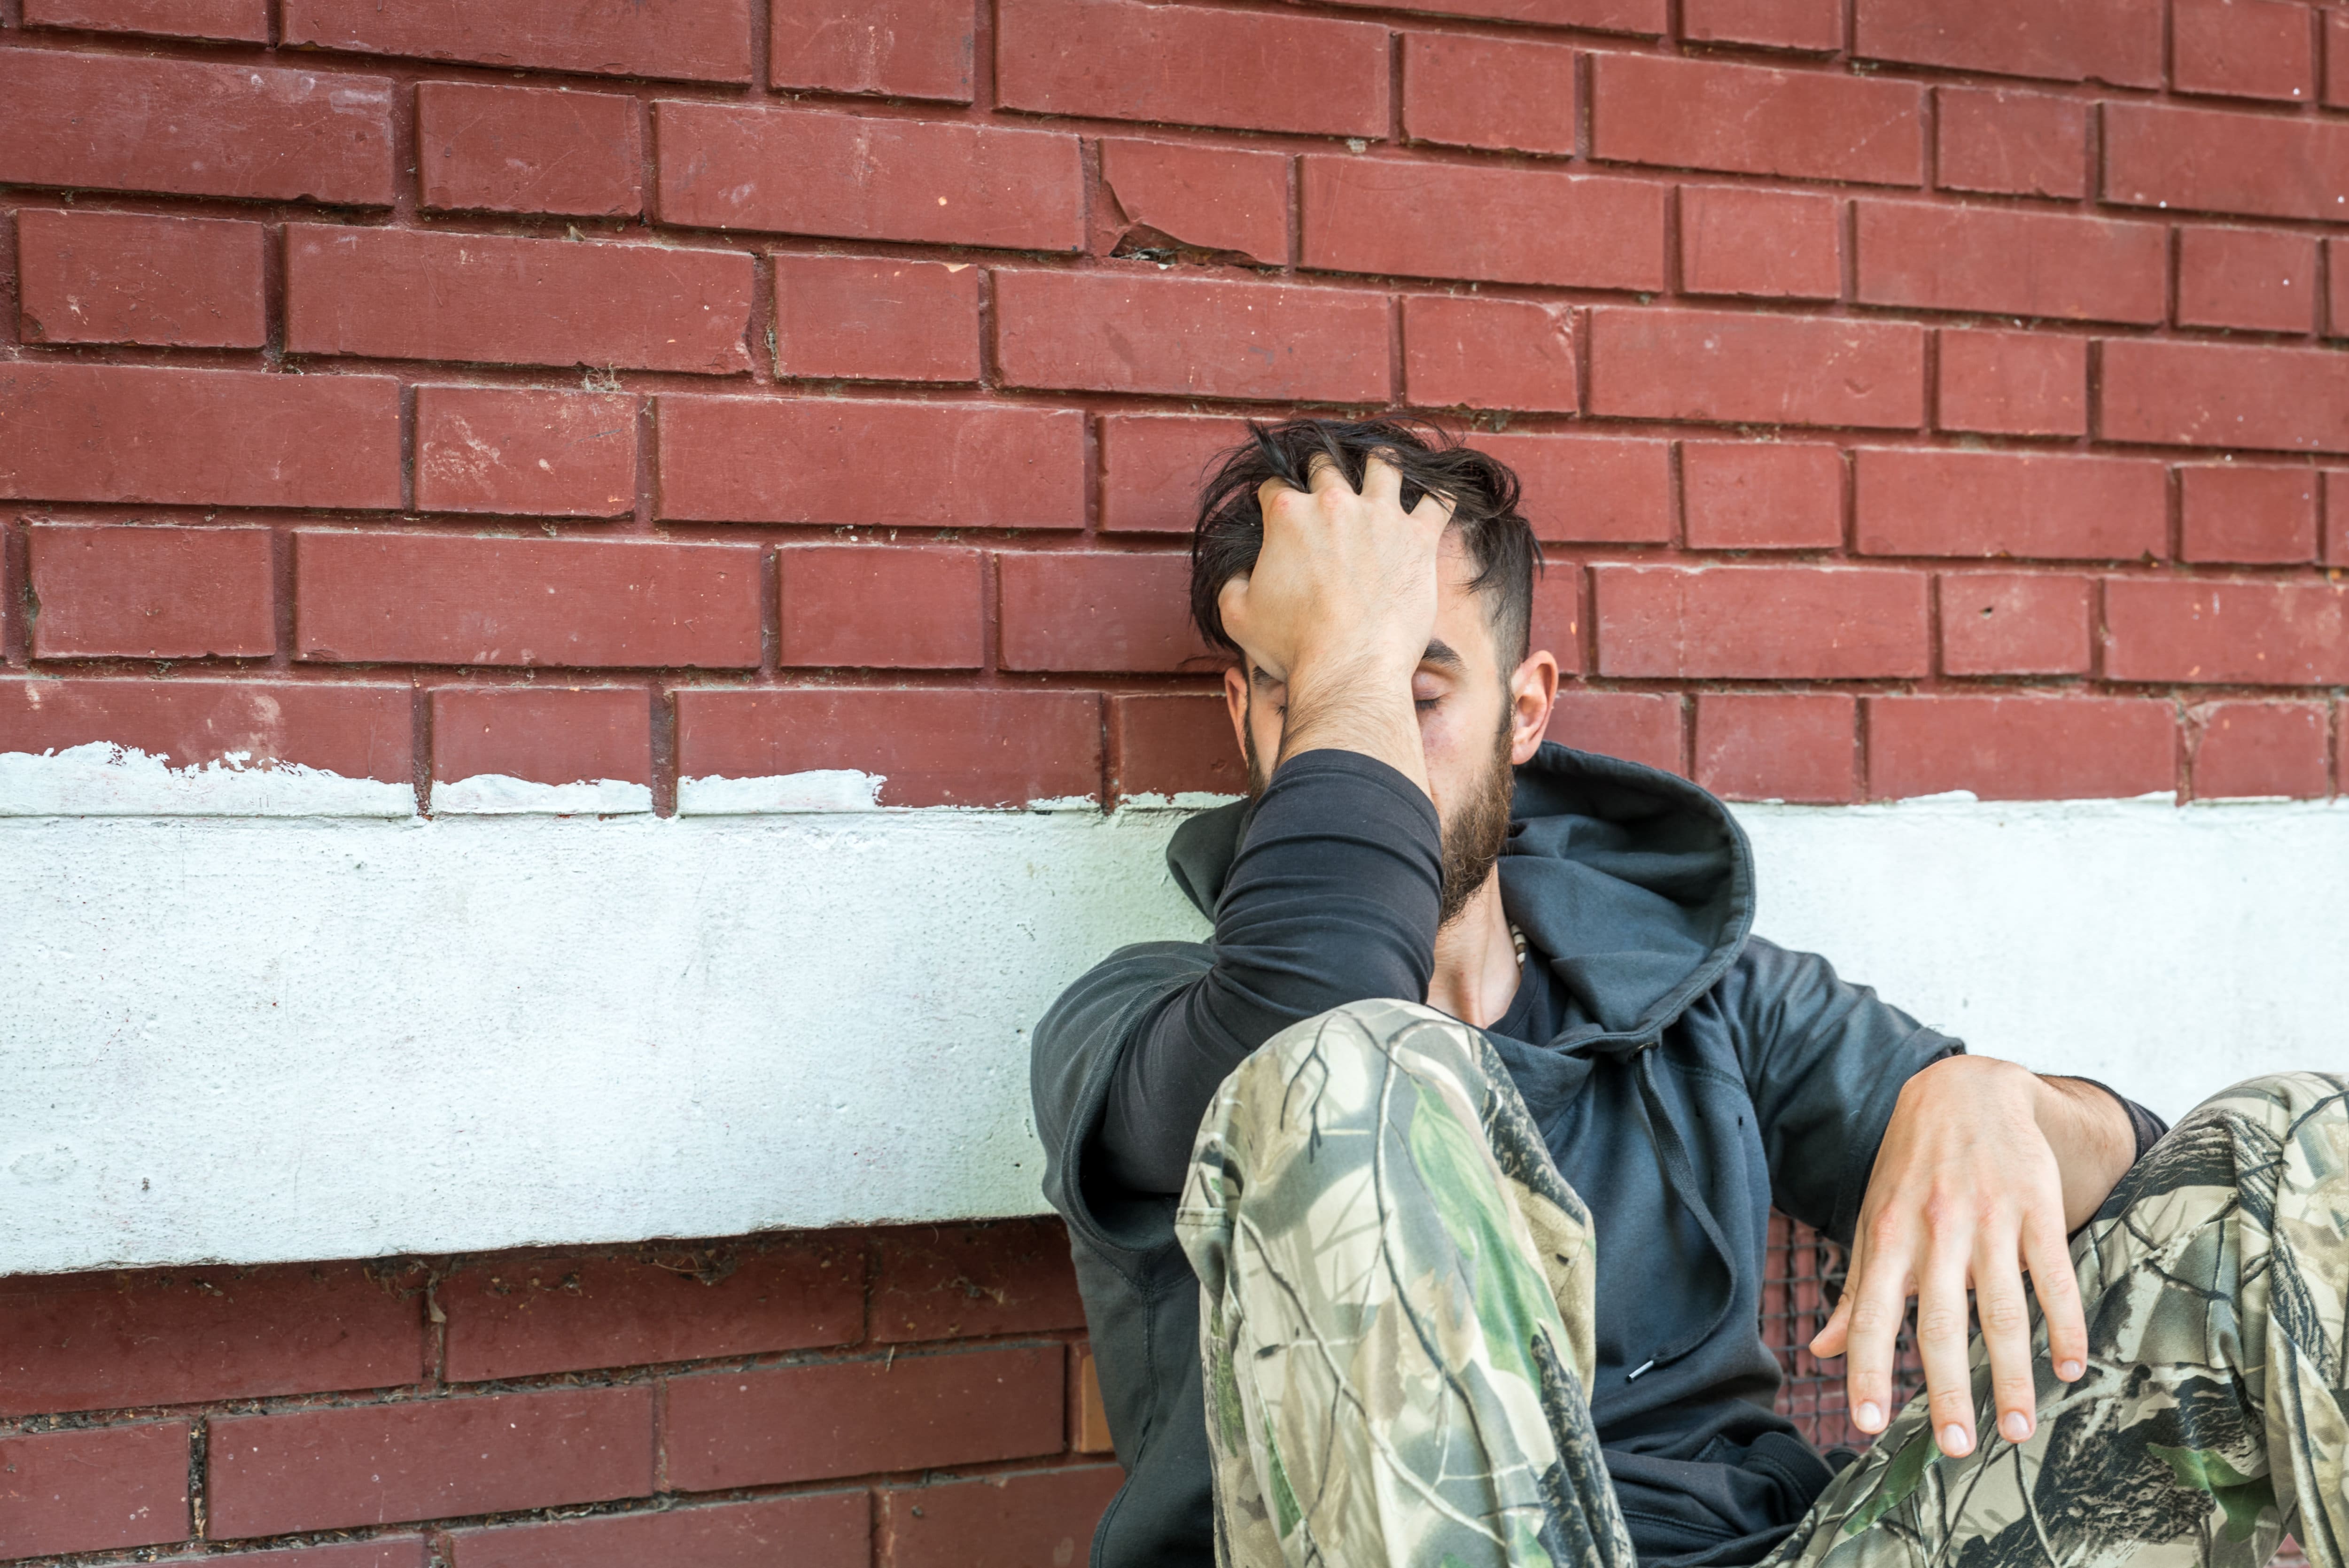 A man sitting on a brick wall at an addiction recovery center, with his hand on his face.